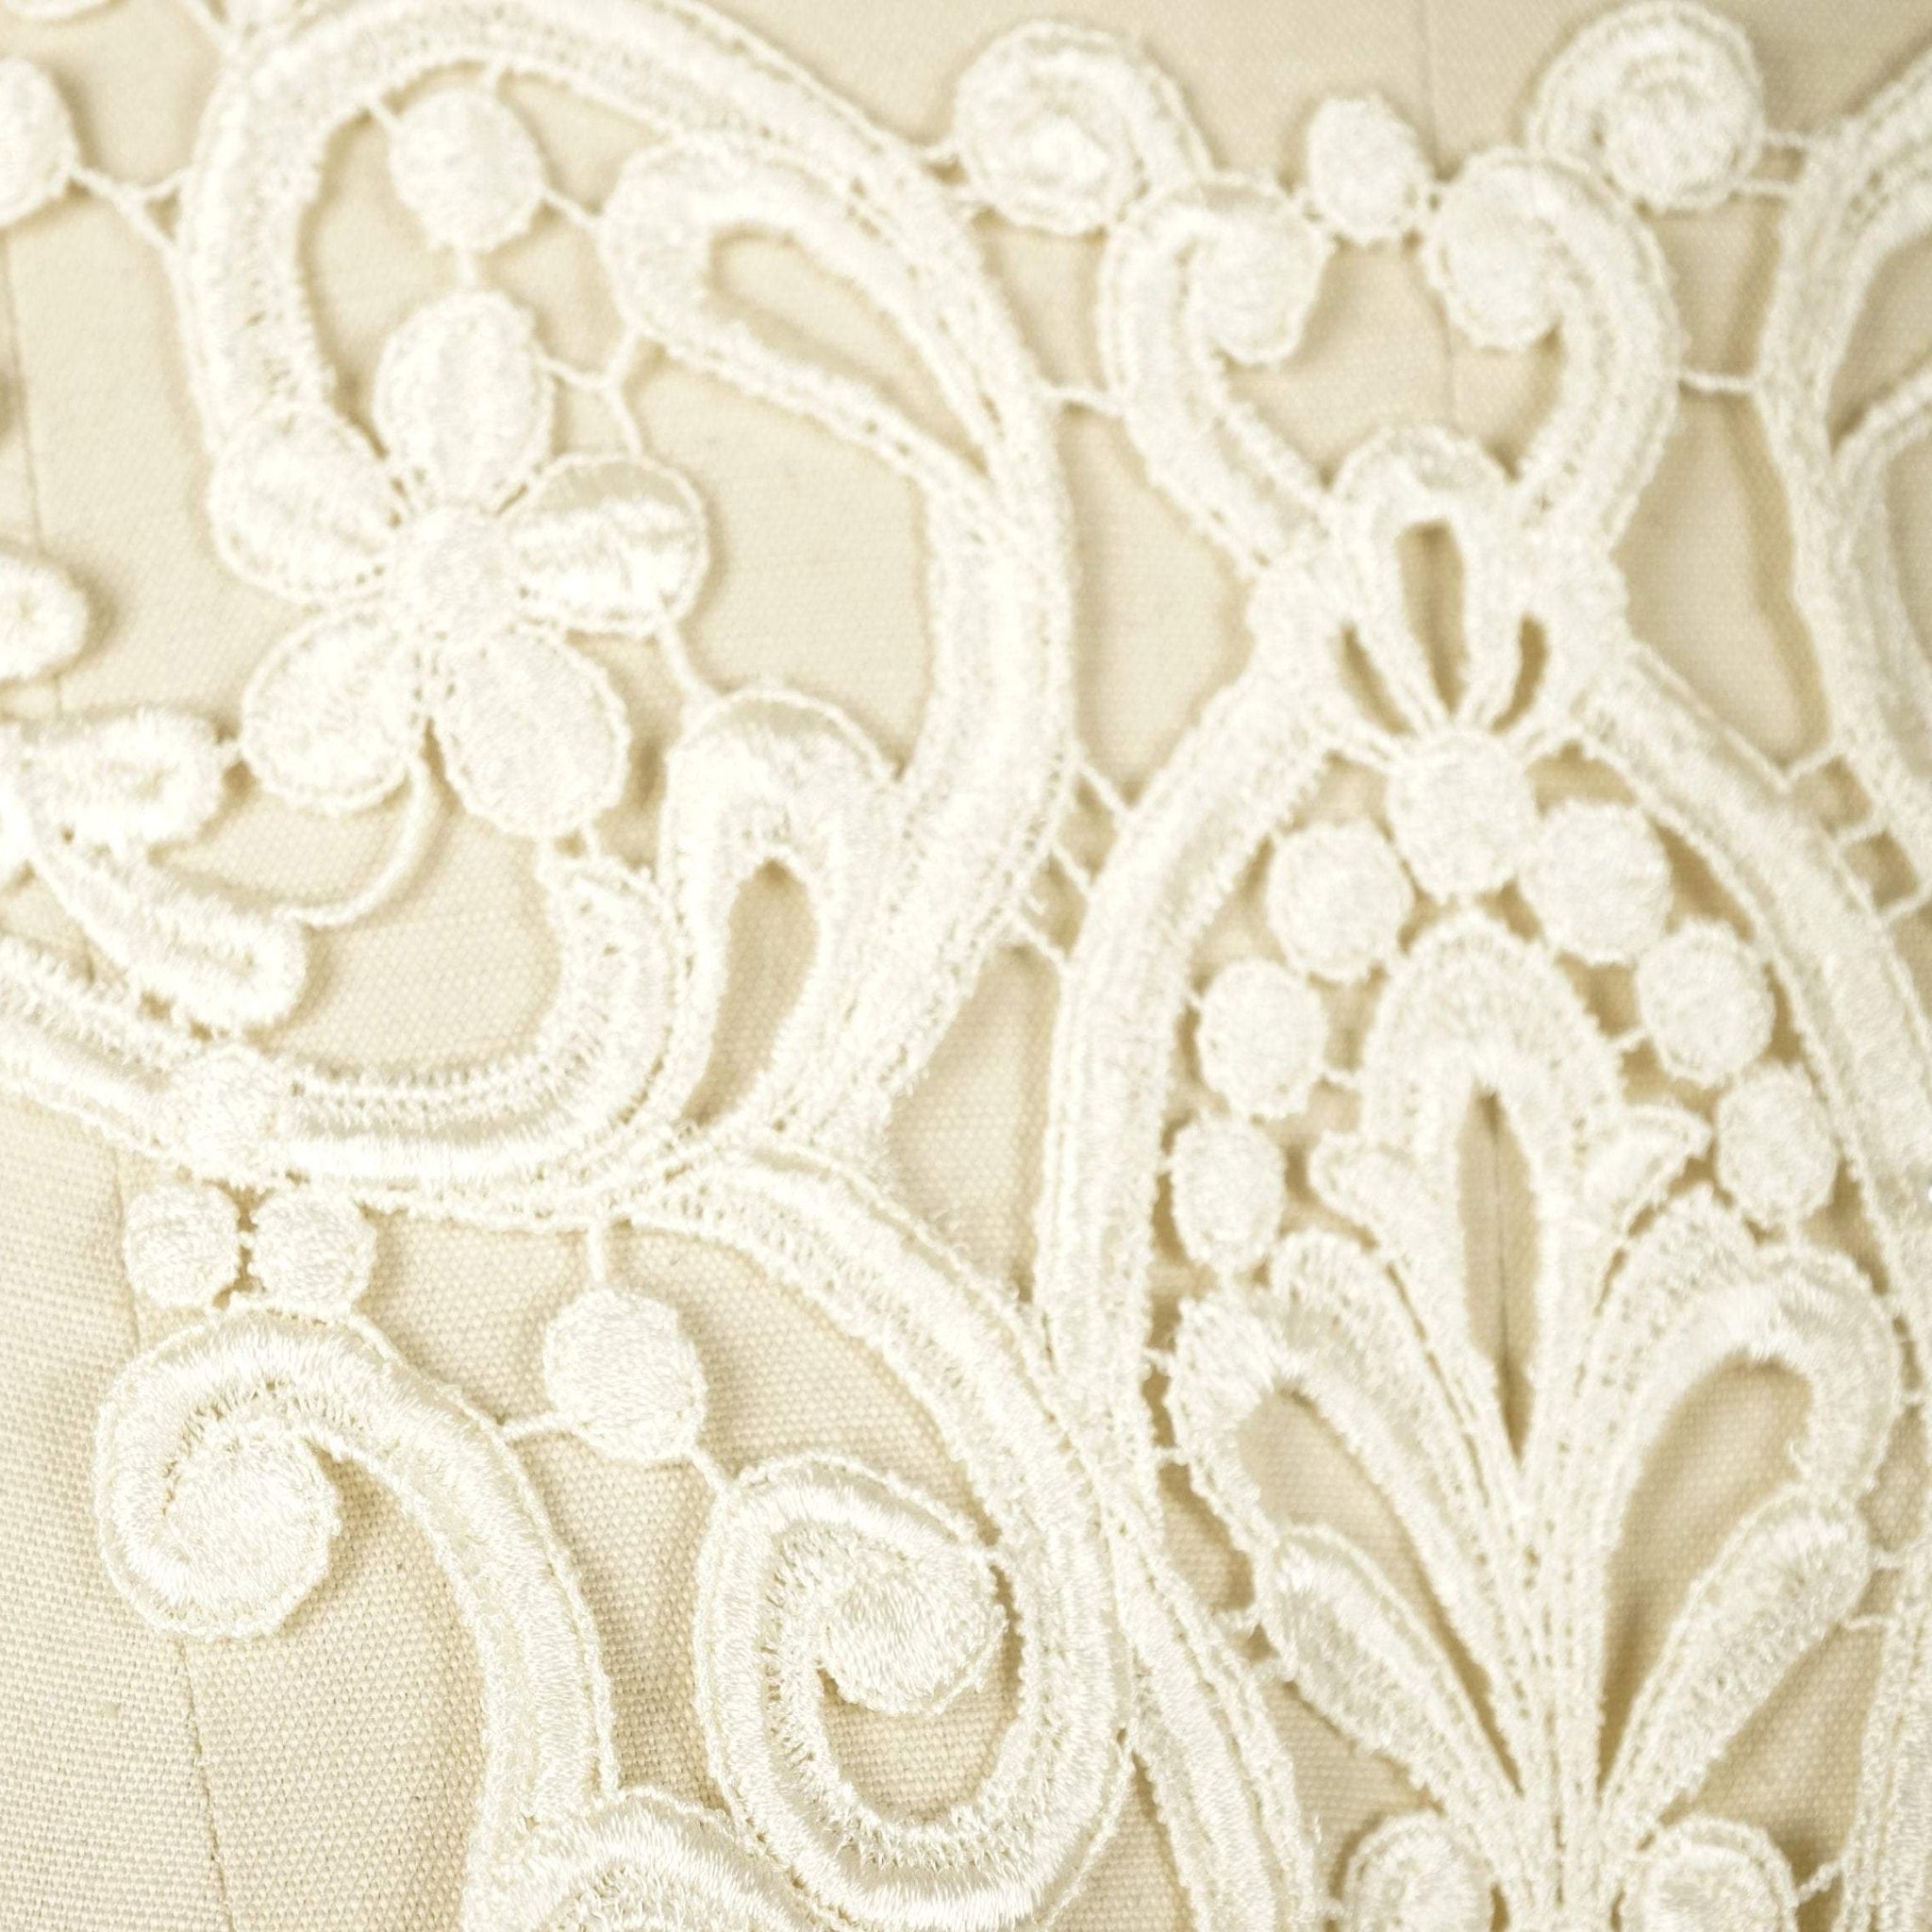 Dramatically Covering Venice Lace V Shaped Applique: Black/White/Ivory/Gold